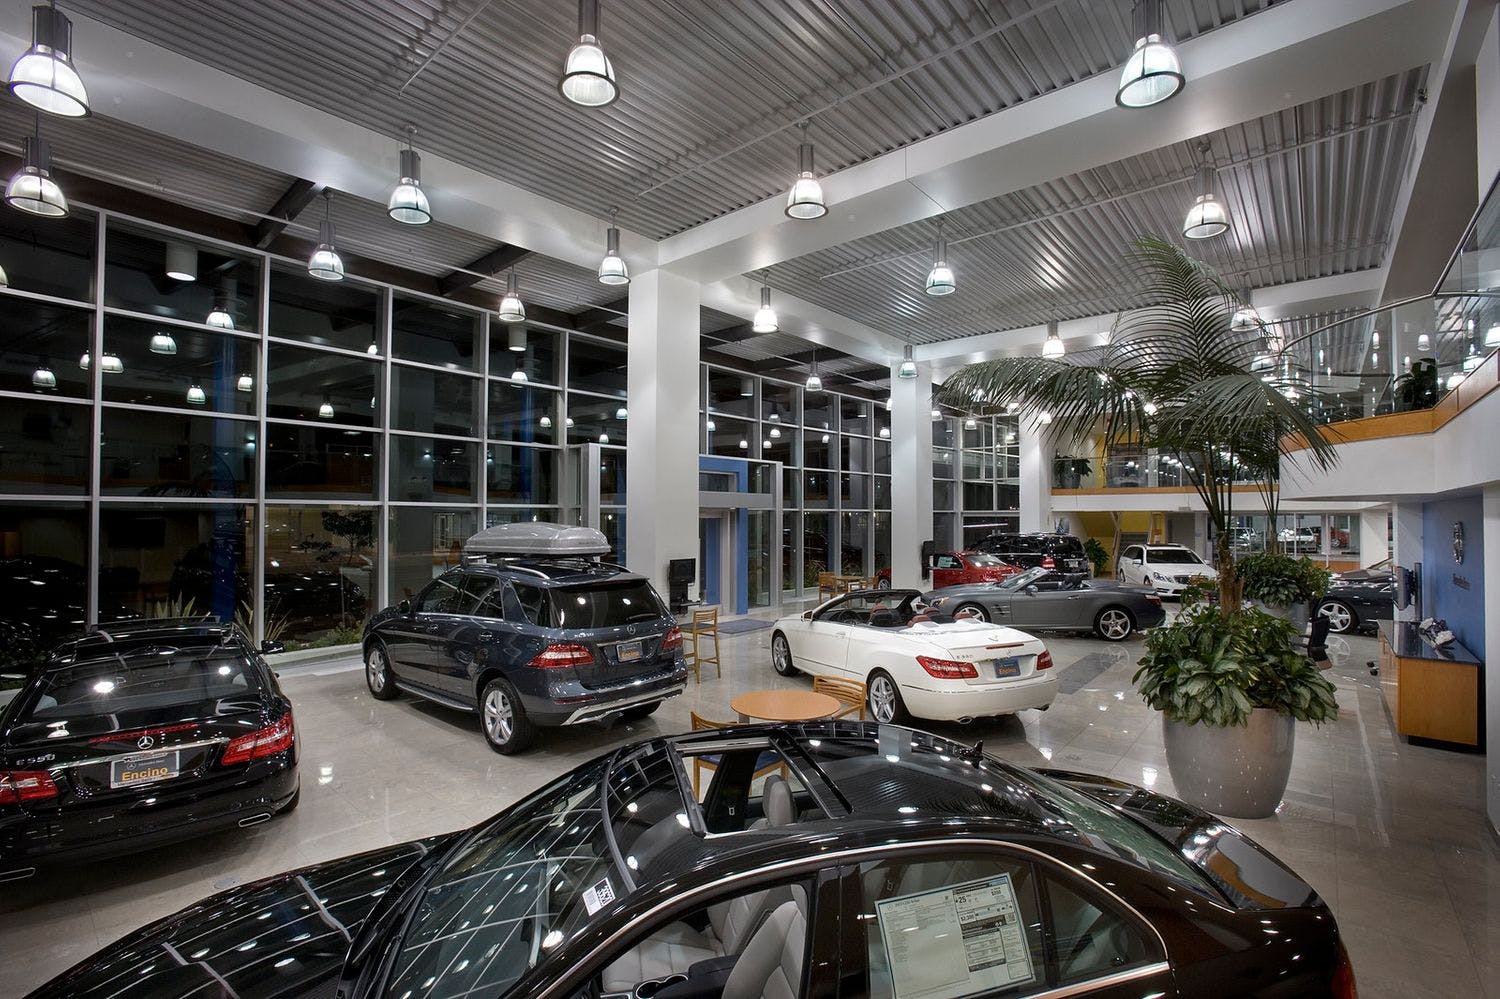 inside the new car showroom | by mercedes818